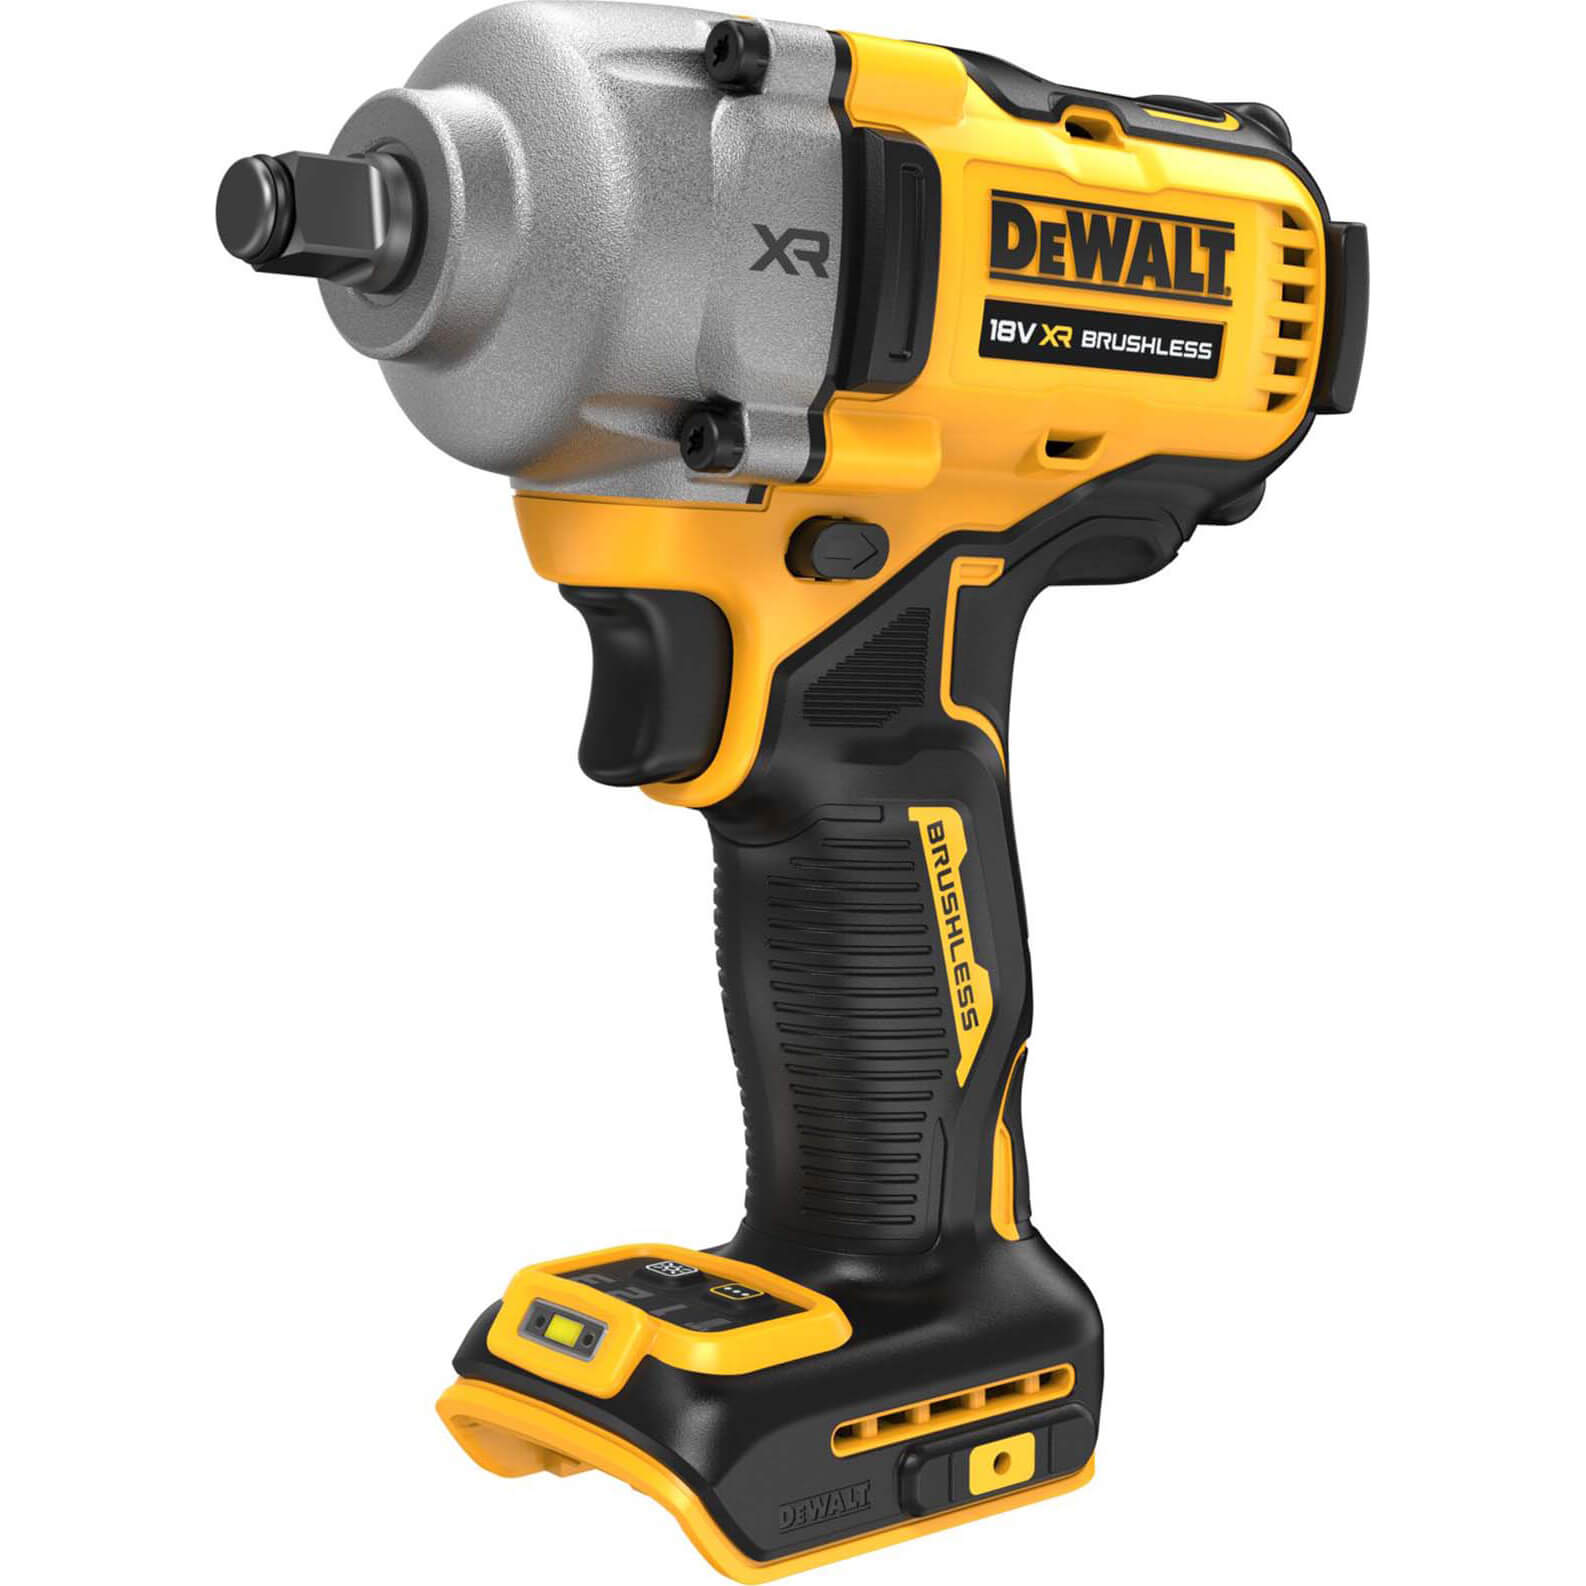 Image of DeWalt DCF891 18v XR Cordless Brushless 1/2" Compact High Torque Wrench No Batteries No Charger No Case